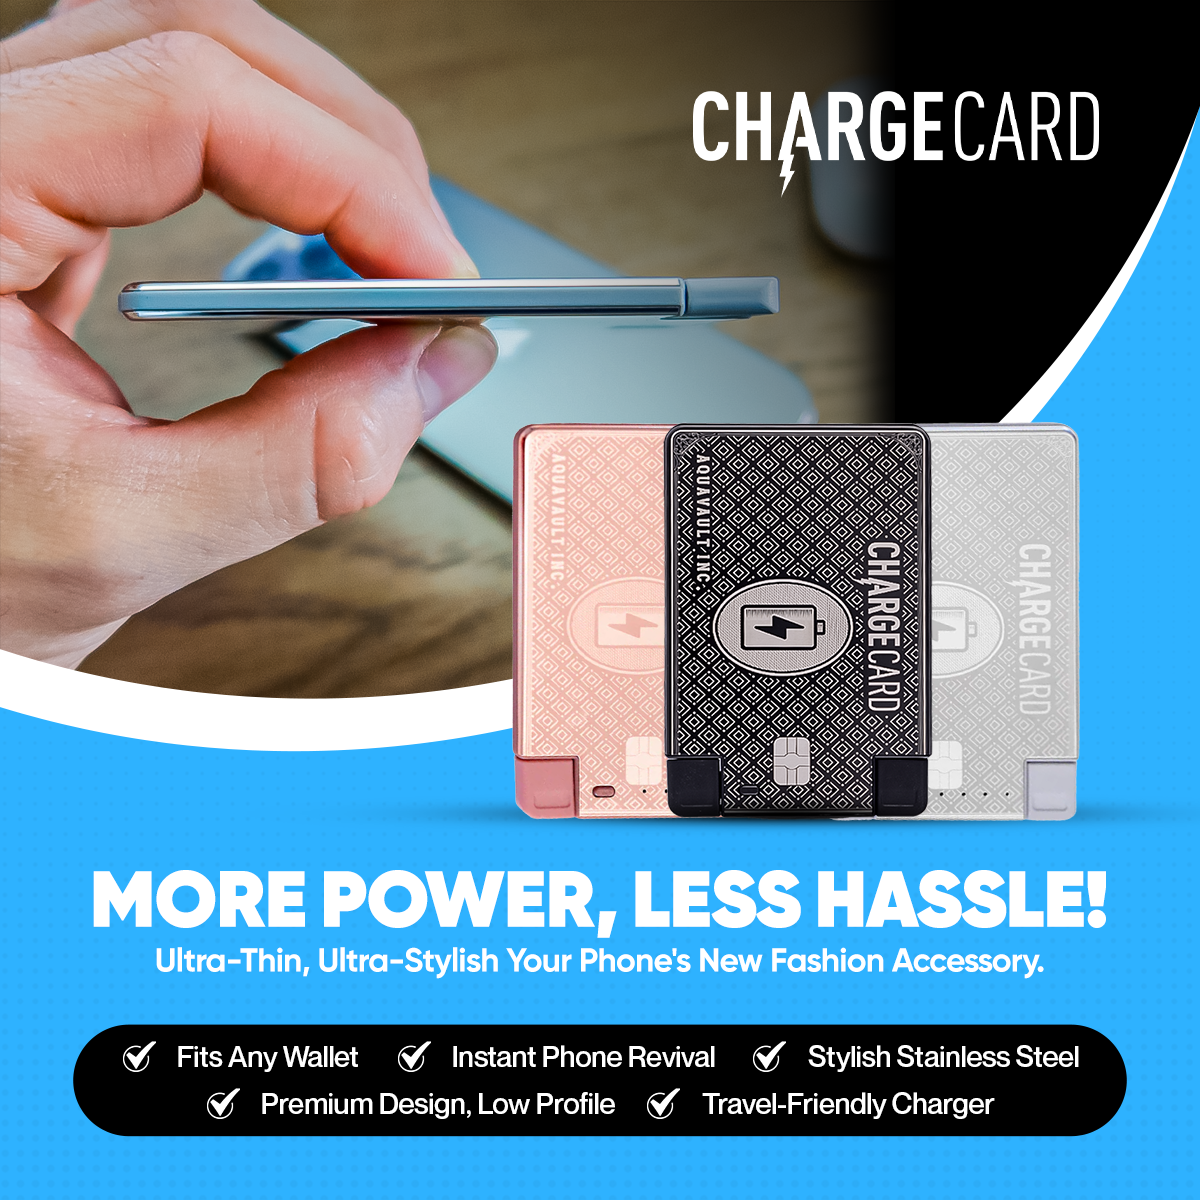 ChargeCard - Credit Card Size Phone Charger – AquaVault Inc.